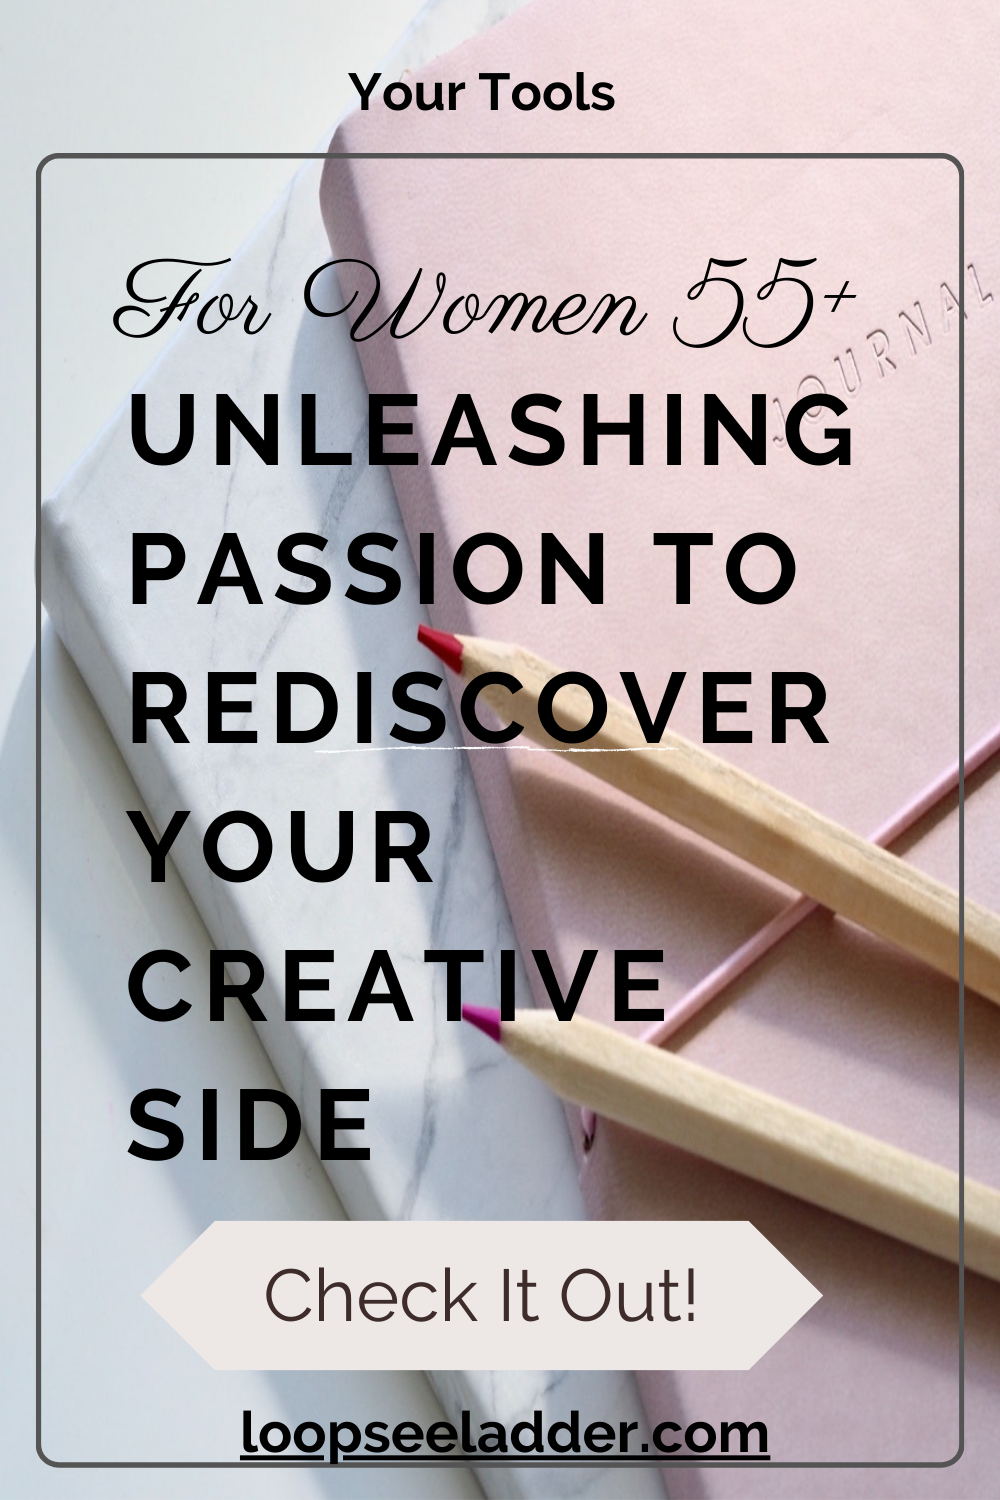 Unleashing Your Passion: How Women Over 55 Can Rediscover Their Creative Side